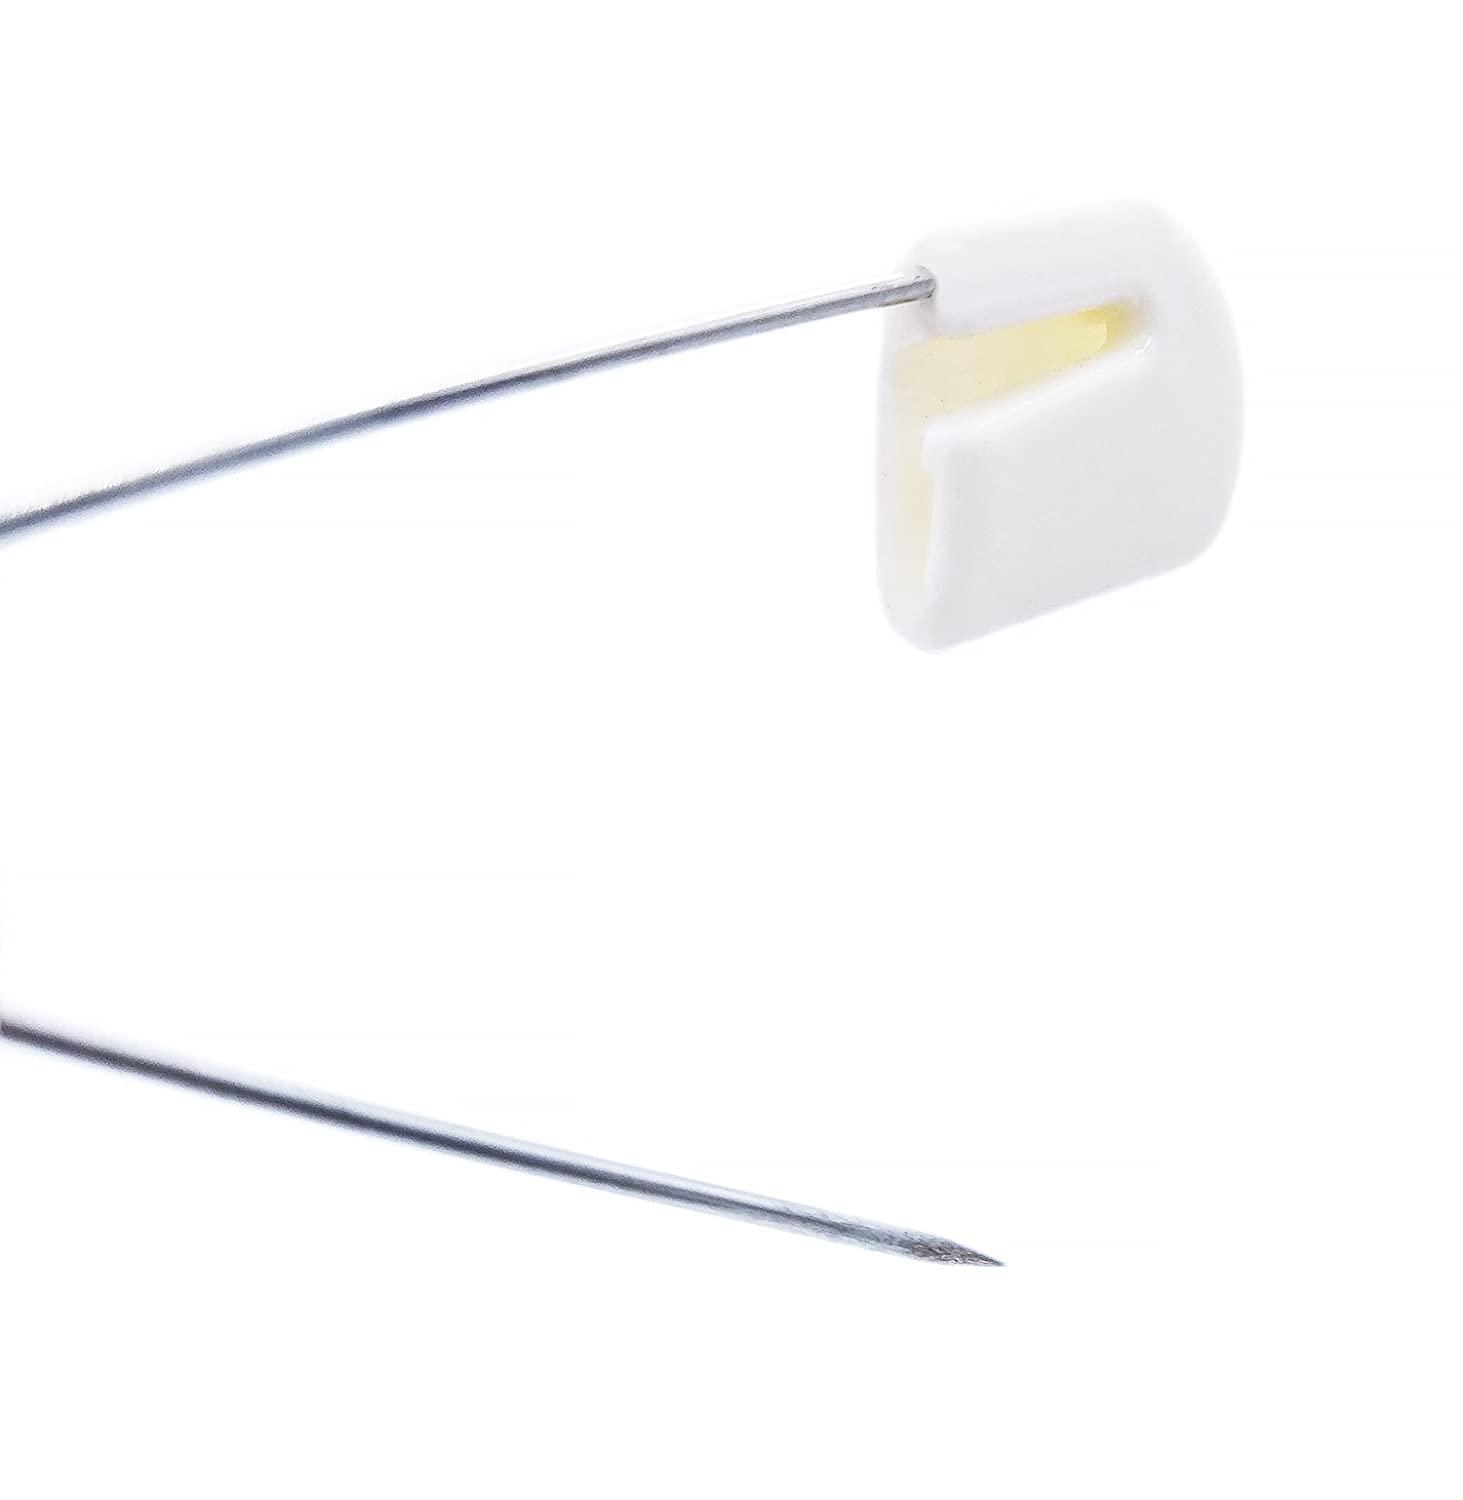 Diaper Pins, White Color Nappy Safety Pins Hold Clip Locking Cloth